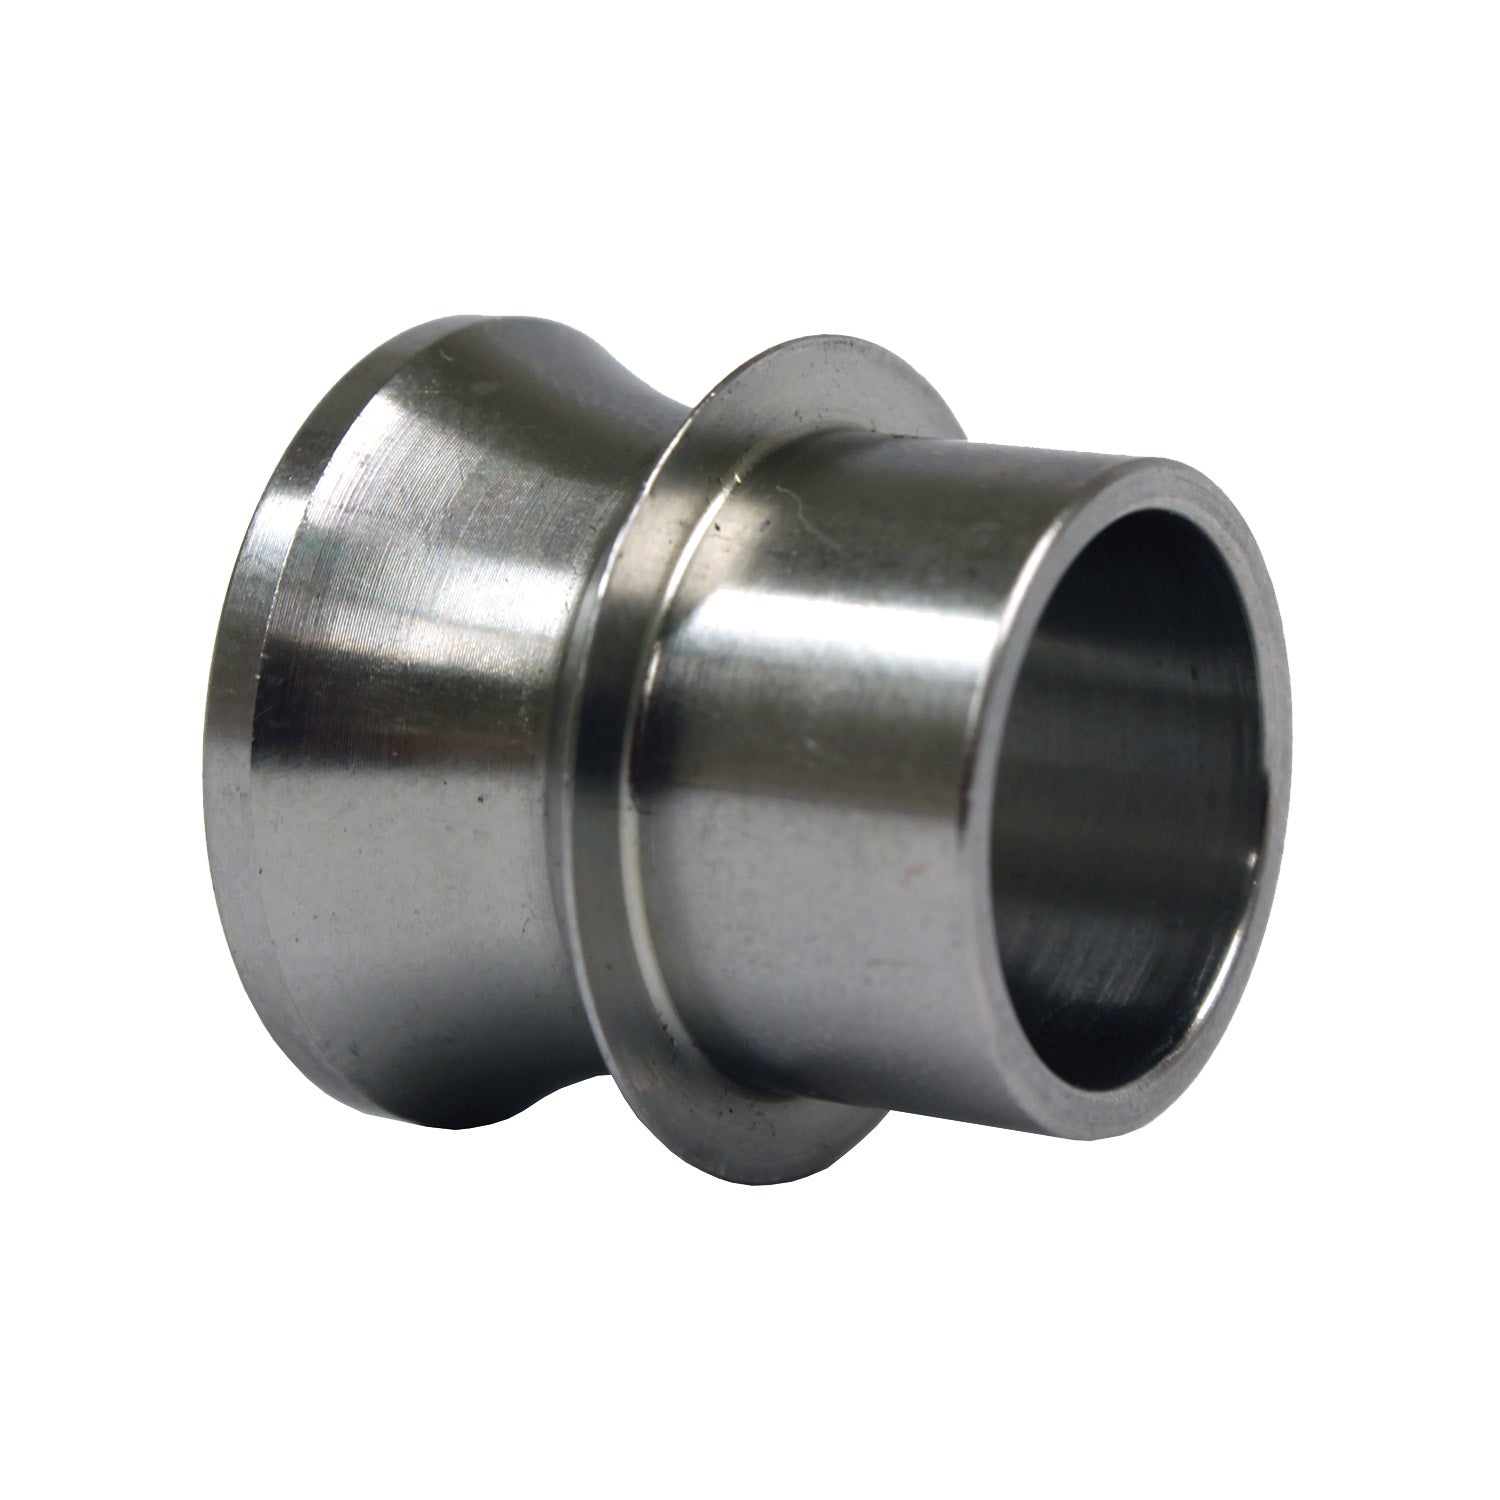 QA1 SN16-1224-W High Misalignment Spacer, 1 inch Od Ss, .75 inch X 4 inch Total Width